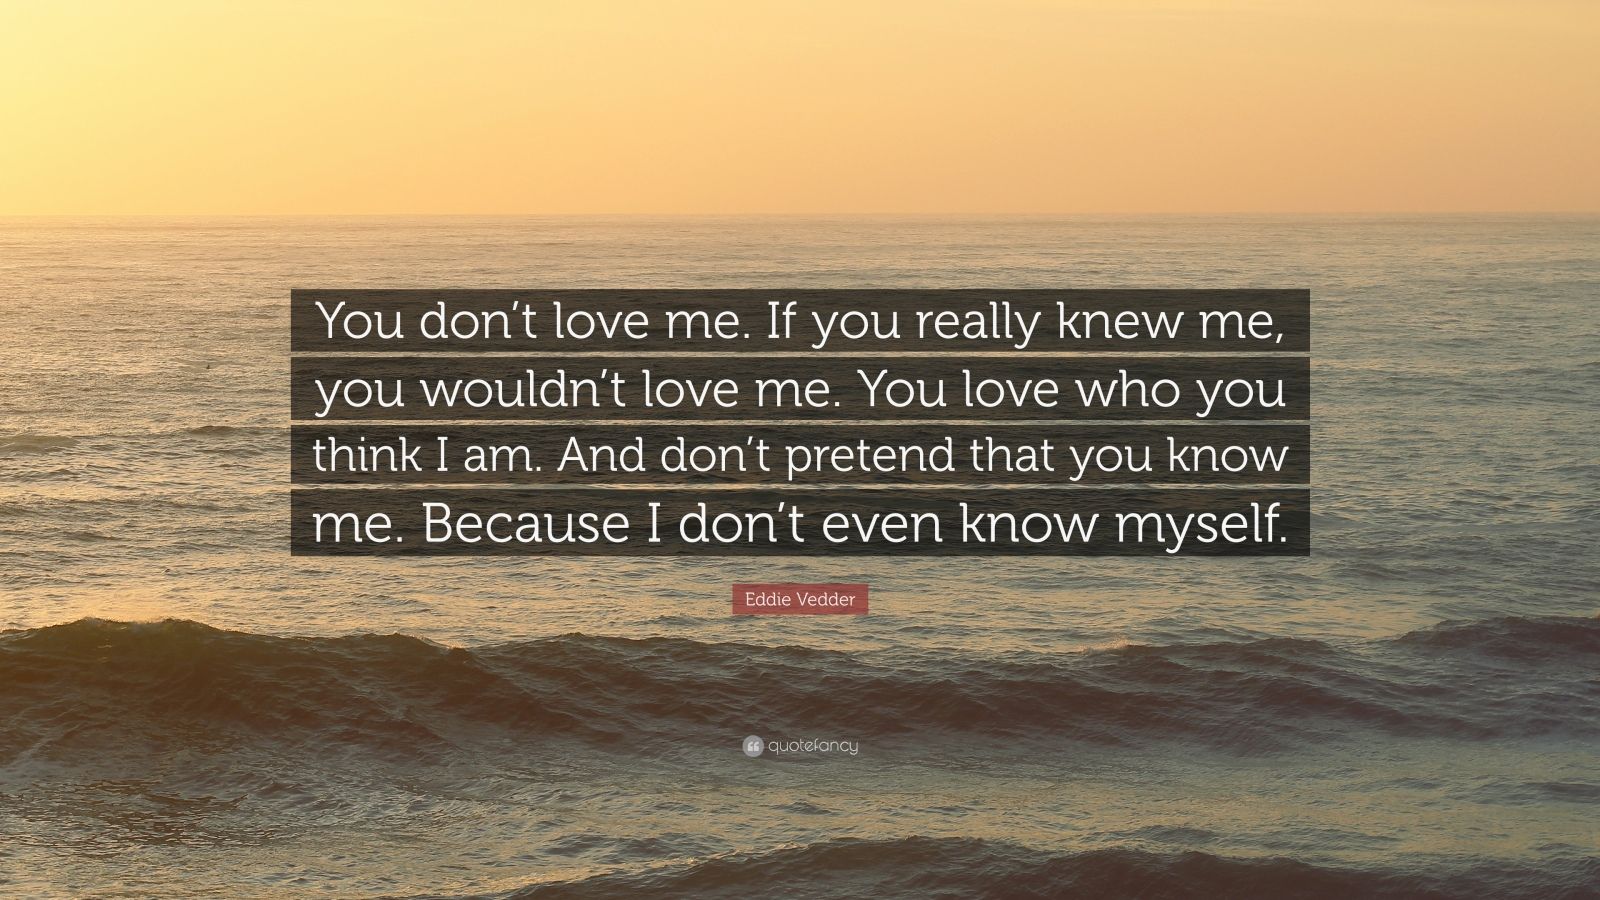 Eddie Vedder Quote: “You don't love me. If you really knew me, you ...